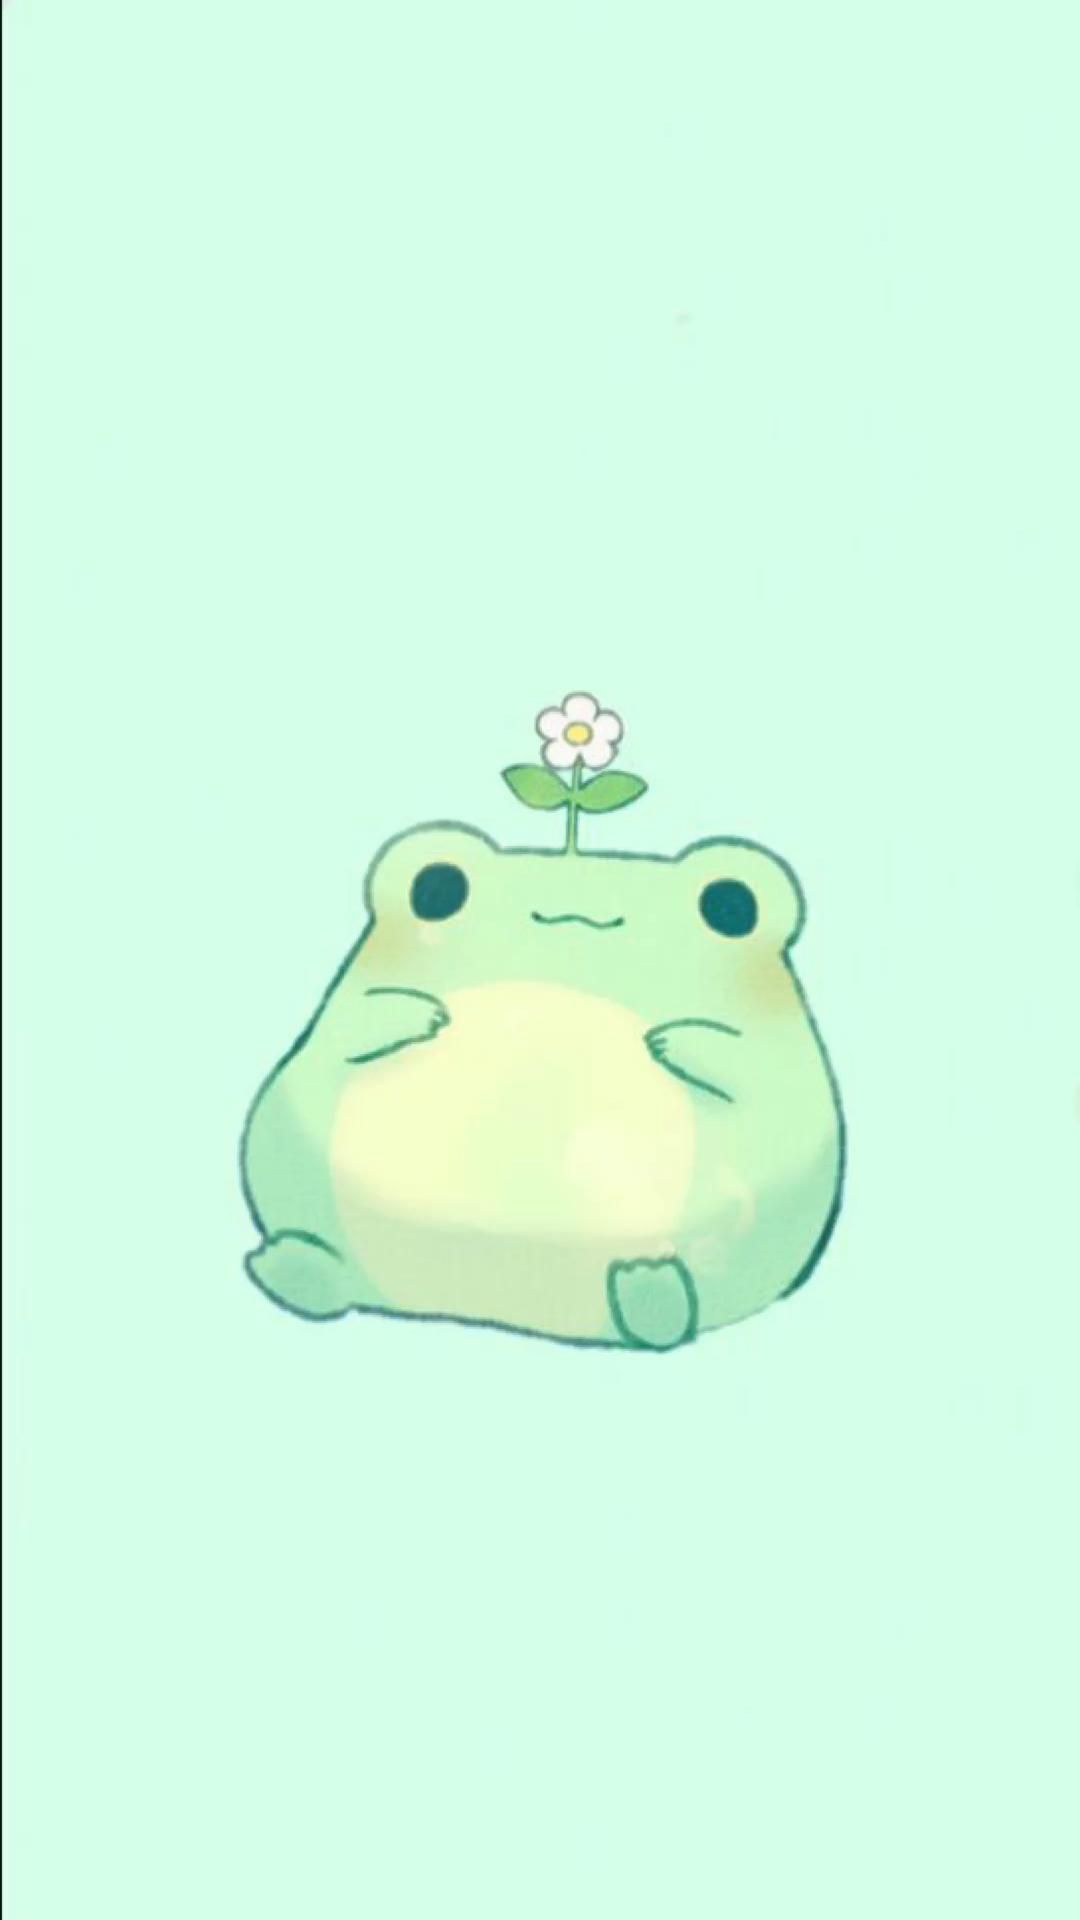 IPhone wallpaper with a green frog holding a flower on its head - Frog, Goblincore